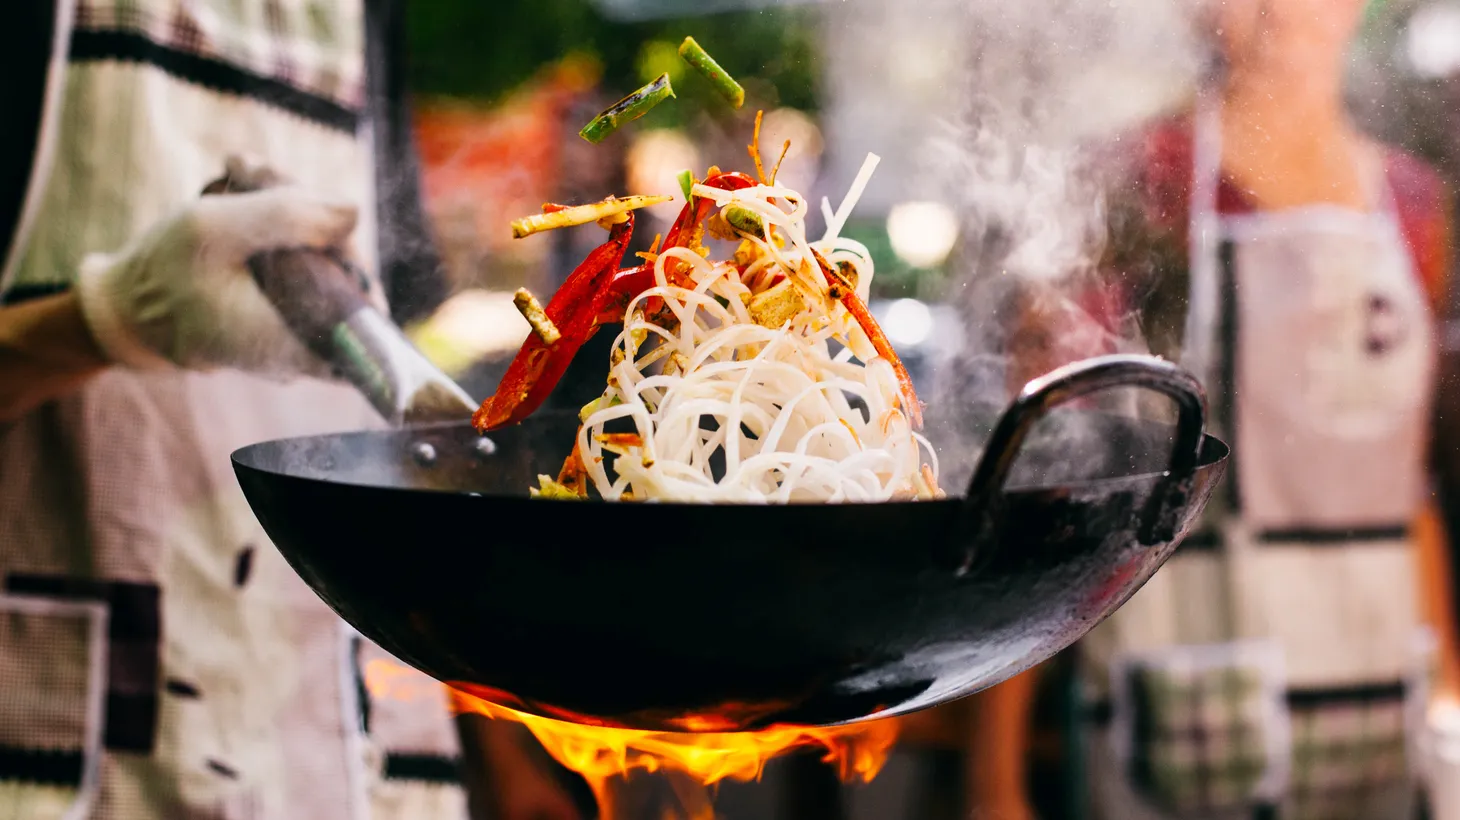 “It’s called stir fry, but really it should be called toss fry because tossing is really the essential action there, getting the food up into the air so that moisture can evaporate, and the food can cook rapidly and evenly,” says J. Kenji López-Alt.